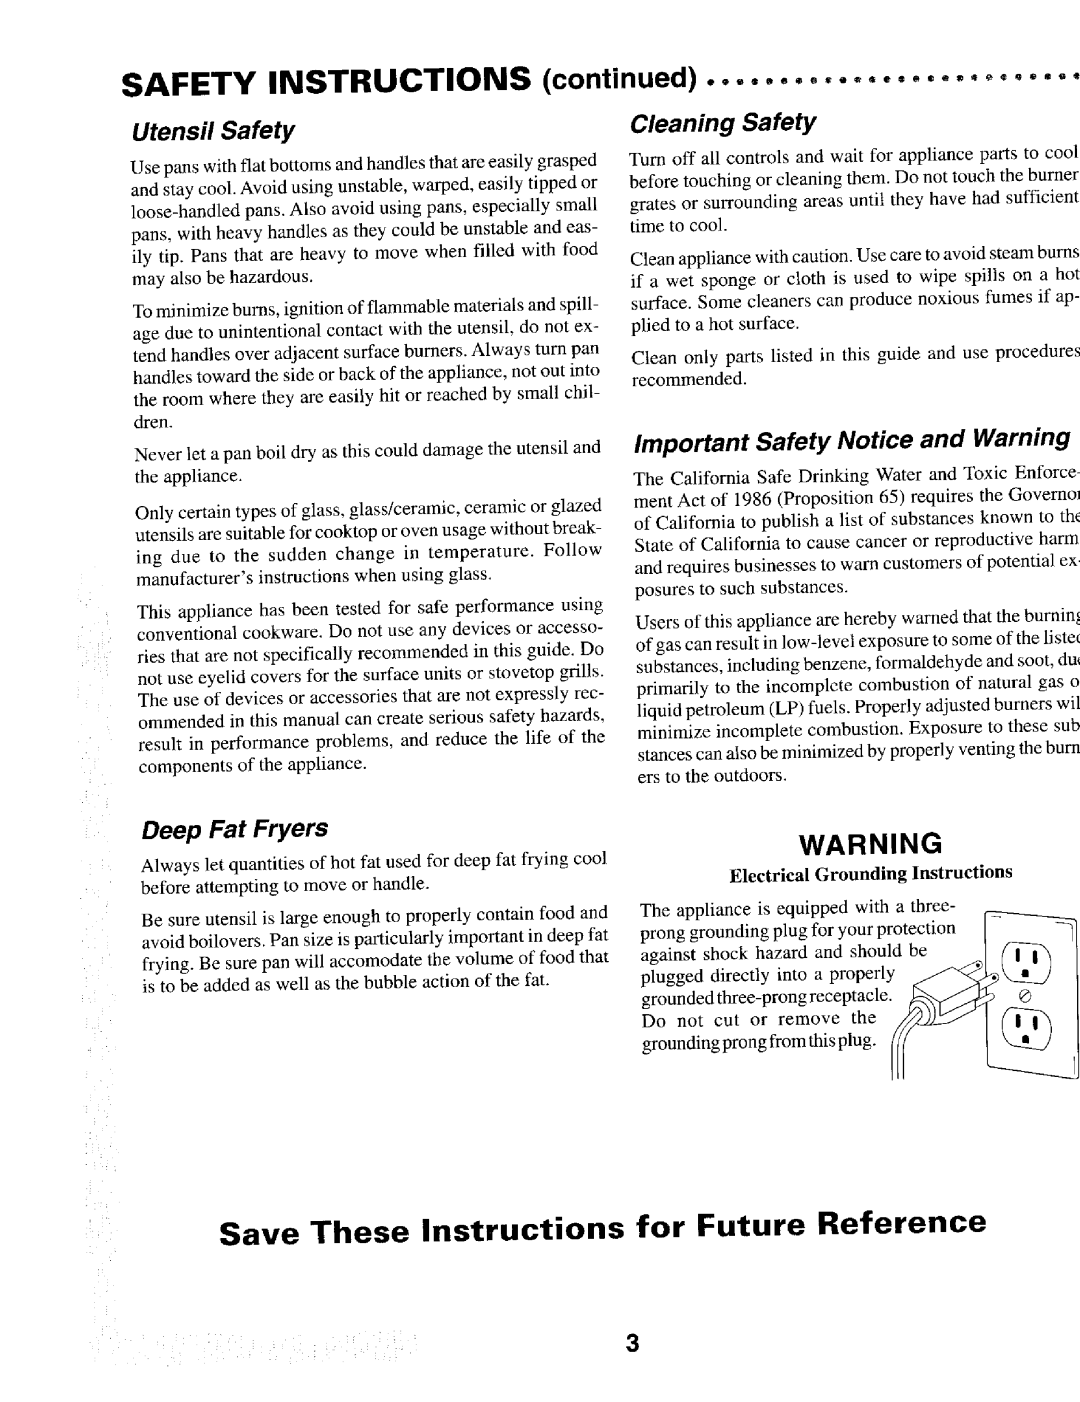 Maytag MGC5430 manual SAFETY INSTRUCTIONS continued, Save These Instructions for Future Reference, Utensil Safety, N I N G 